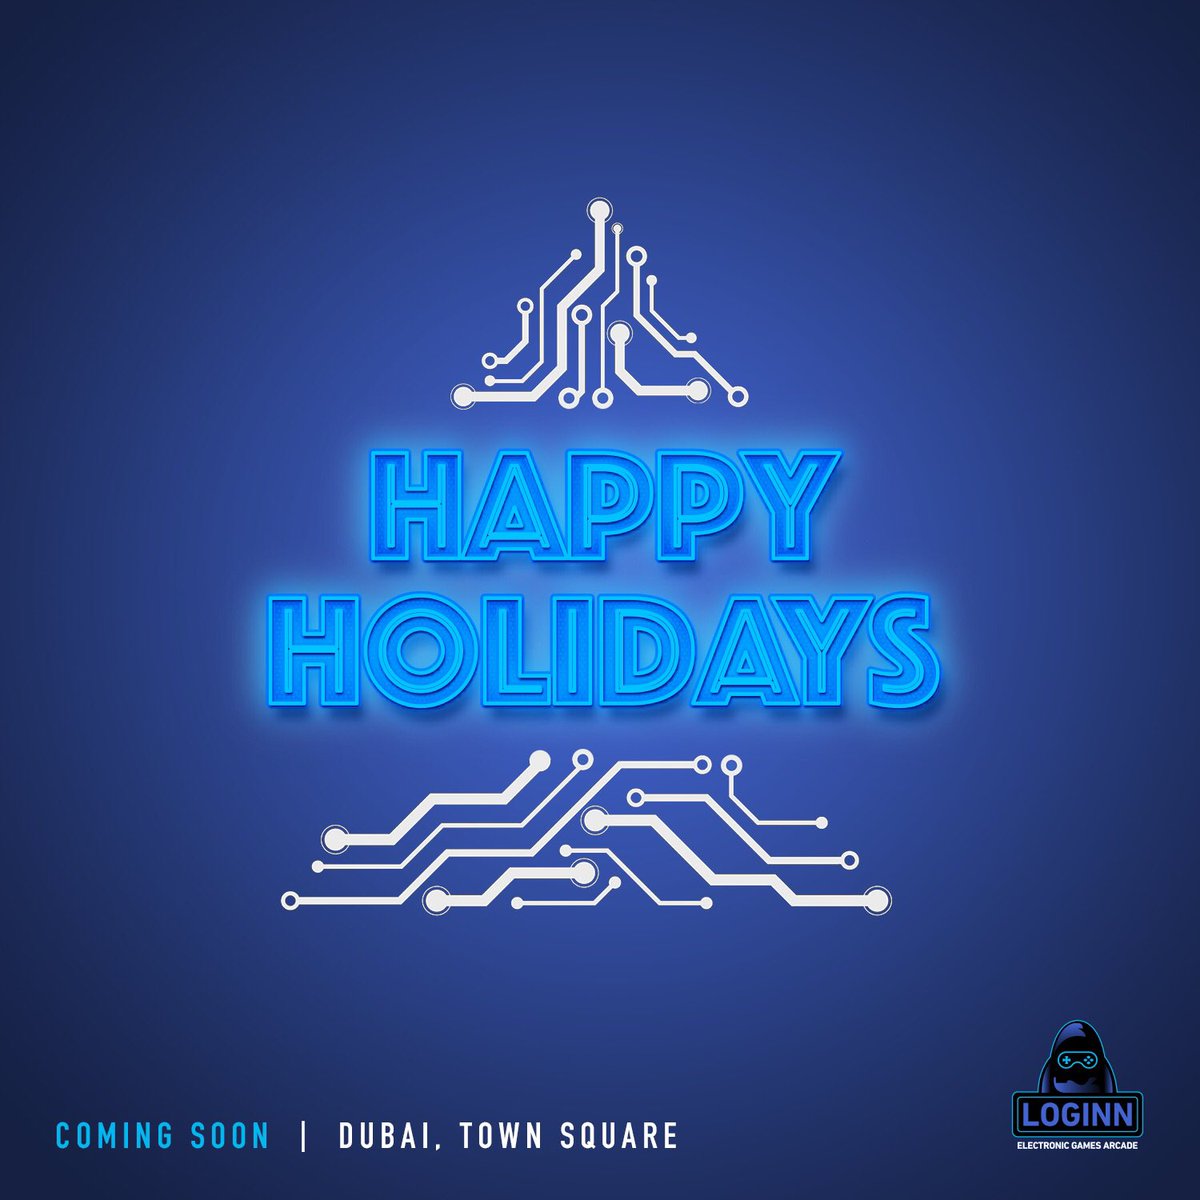 May your holidays be filled with lots of joy and laughter! Happy Holidays 🎅🏻
Stay Tuned, We are Coming Soon #LoginnAE #Dubai #UAE #dubailife #DXB #DubaiGamers #Gamers #UAEGamers #HappyHolidays #MerryChristmas